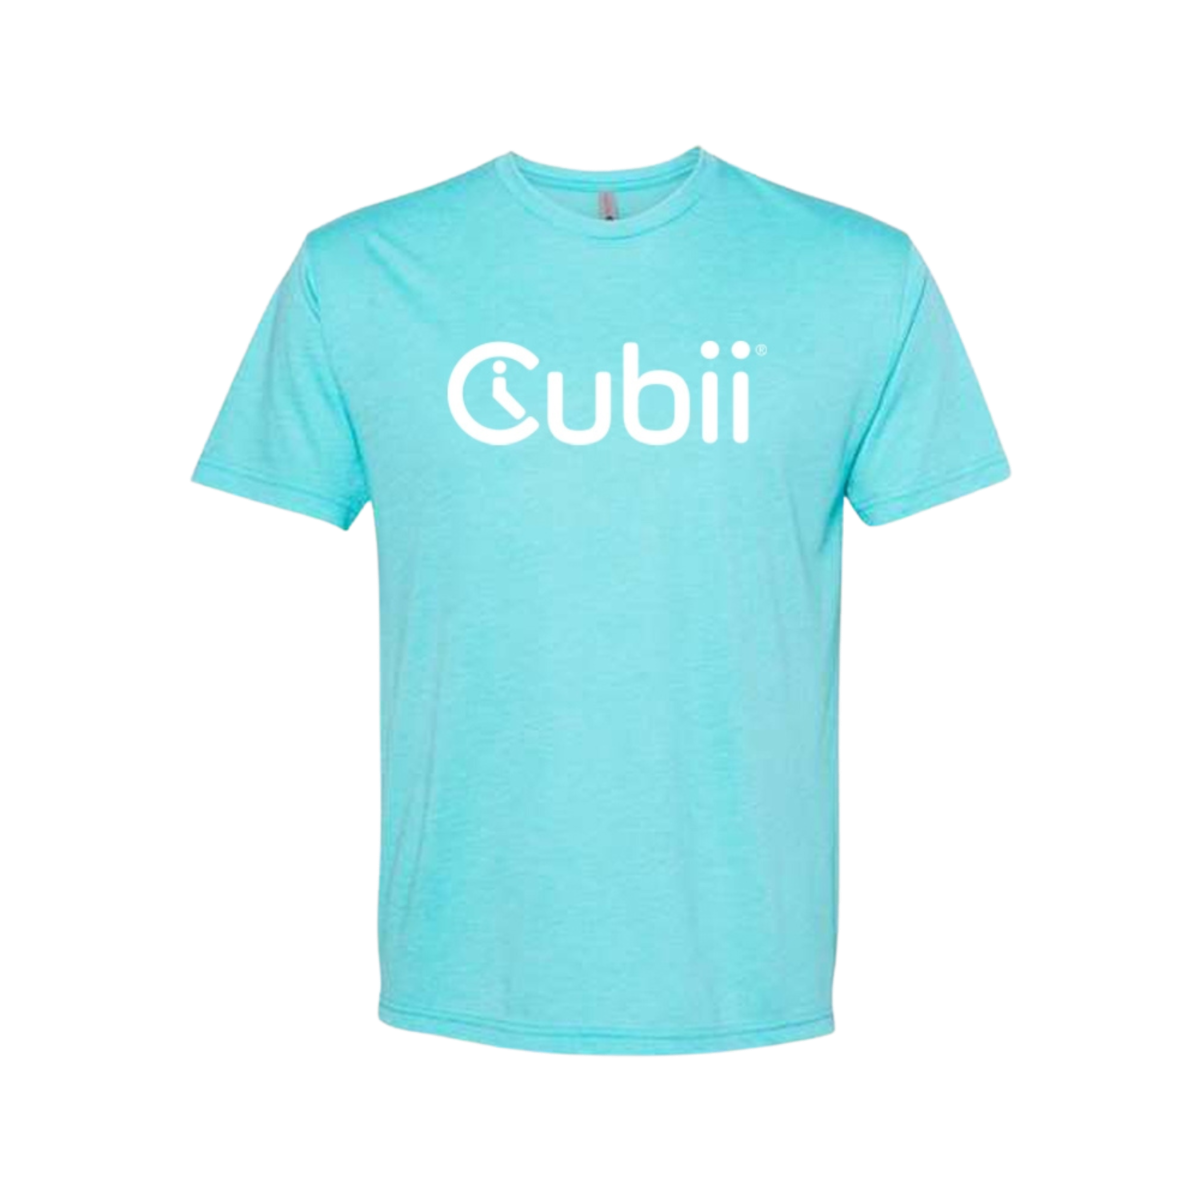 Cubii Accessories | Wearable Weights, Dumbbells, Lumbar Cushions 